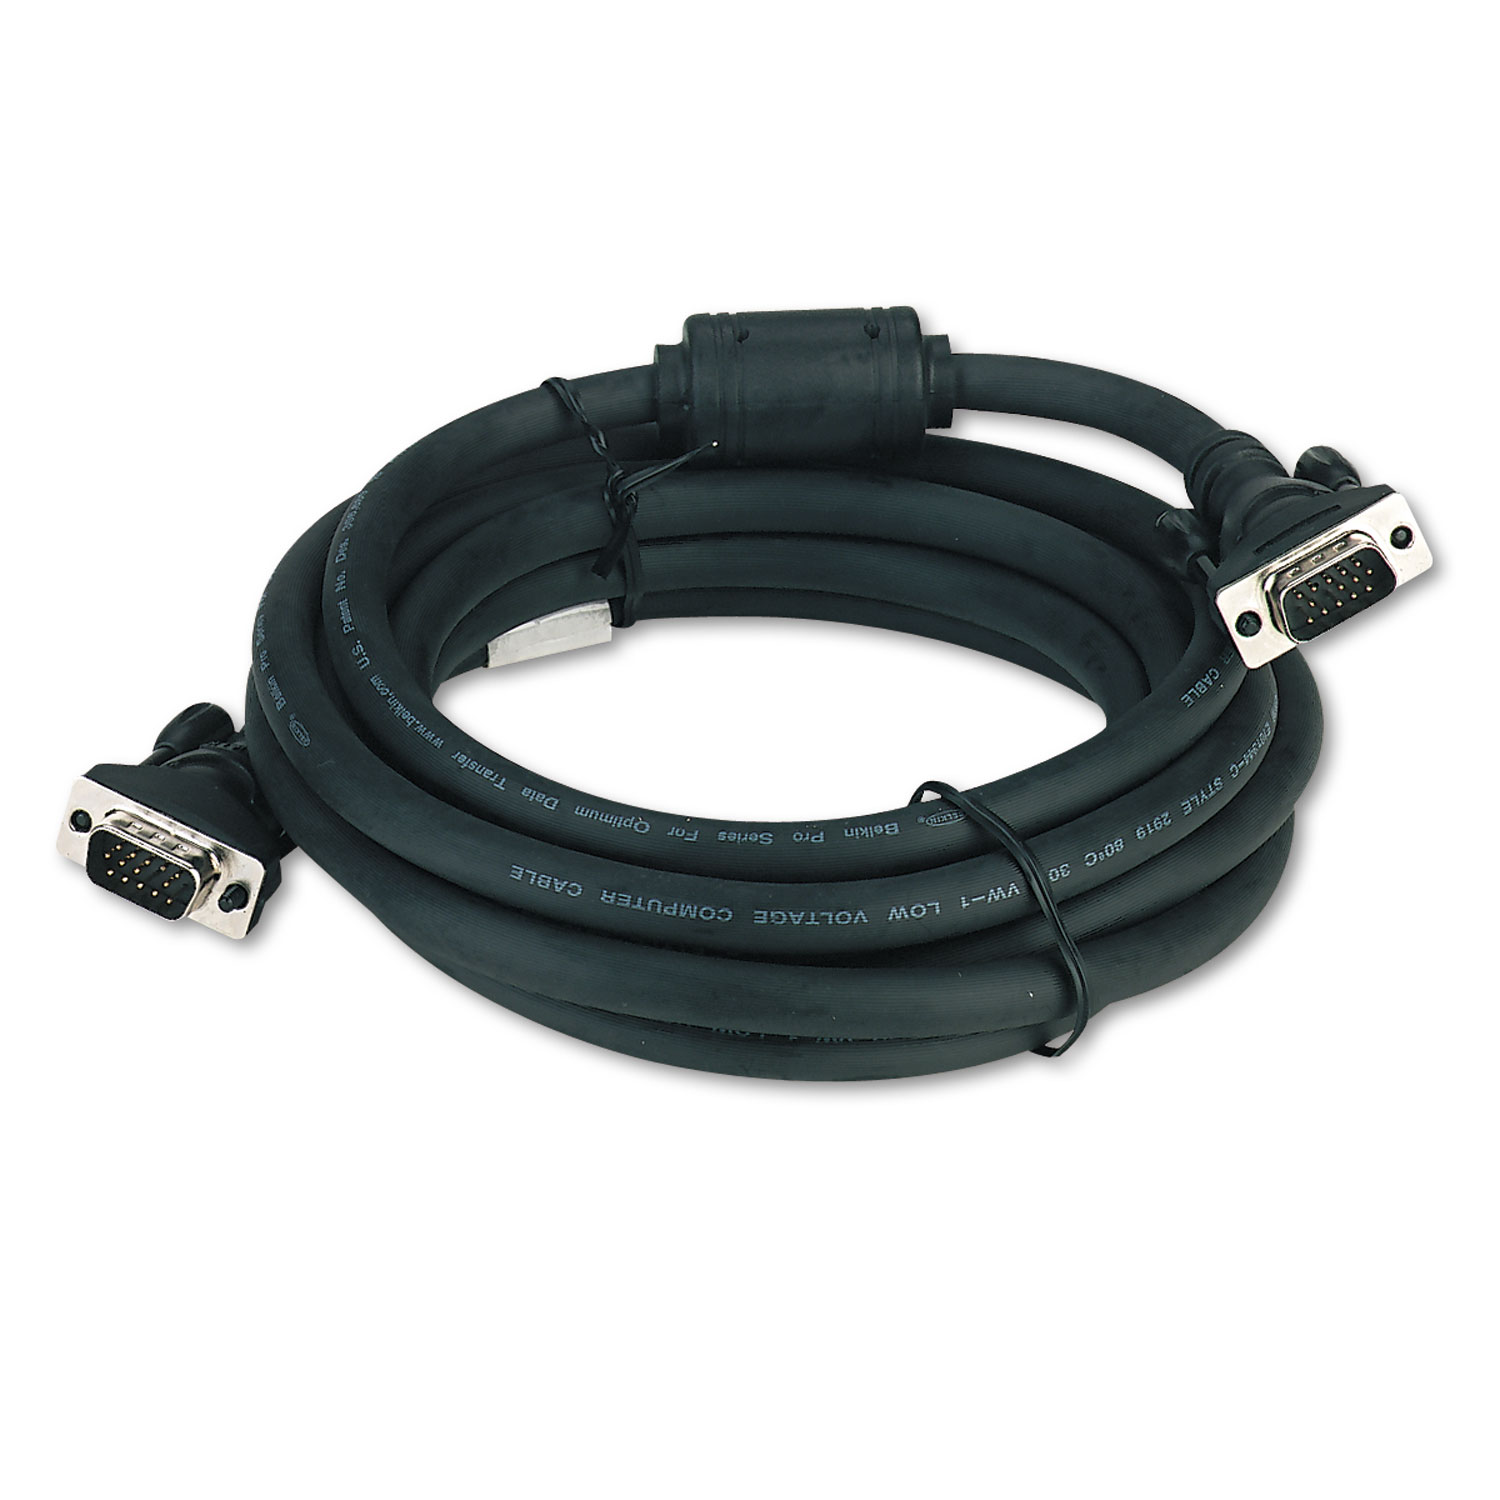  Belkin F3H982-10 Pro Series High Integrity VGA Monitor Cable, 10 ft. (BLKF3H98210) 